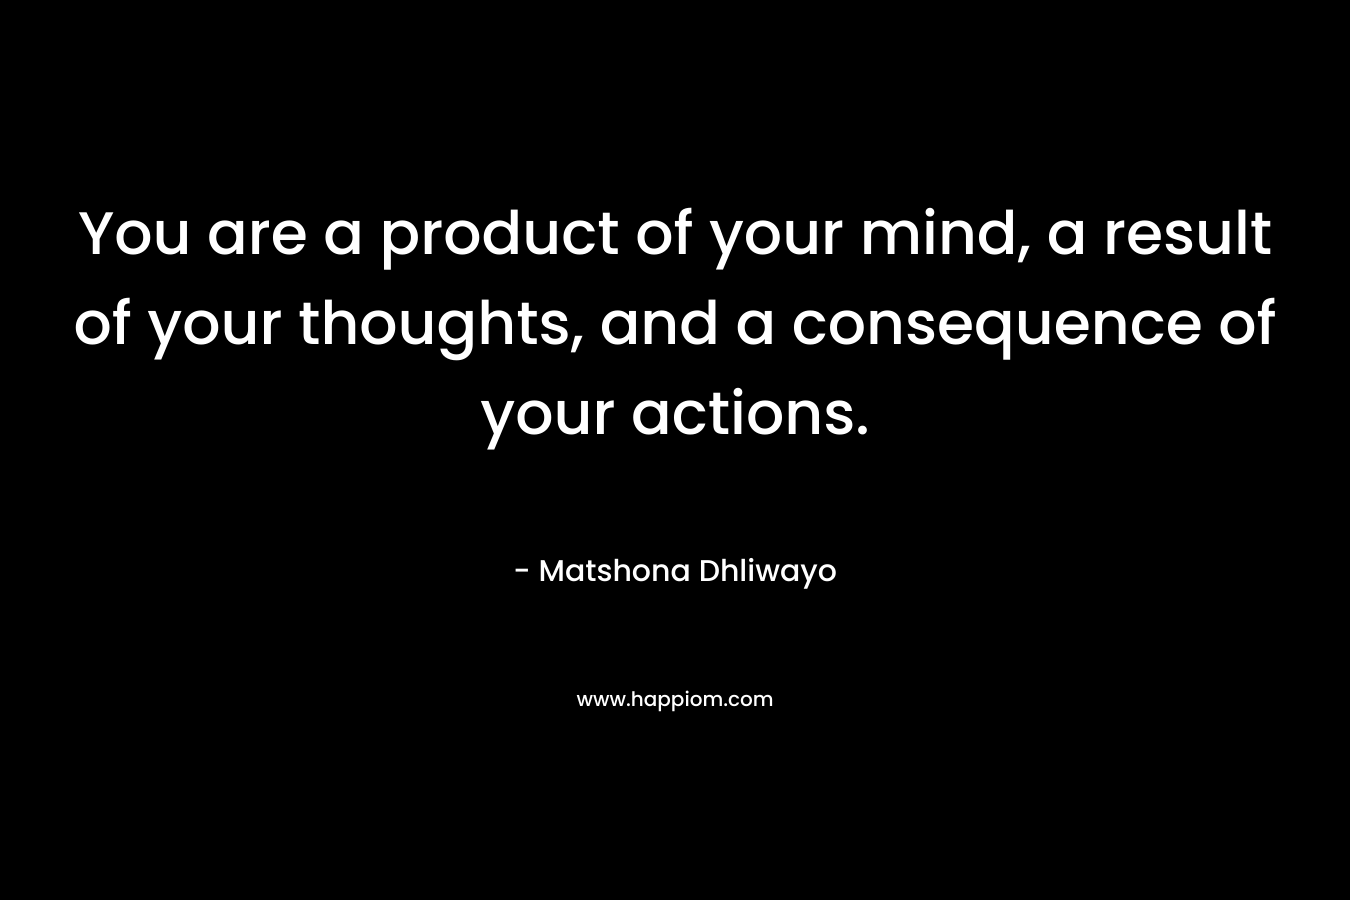 You are a product of your mind, a result of your thoughts, and a consequence of your actions.